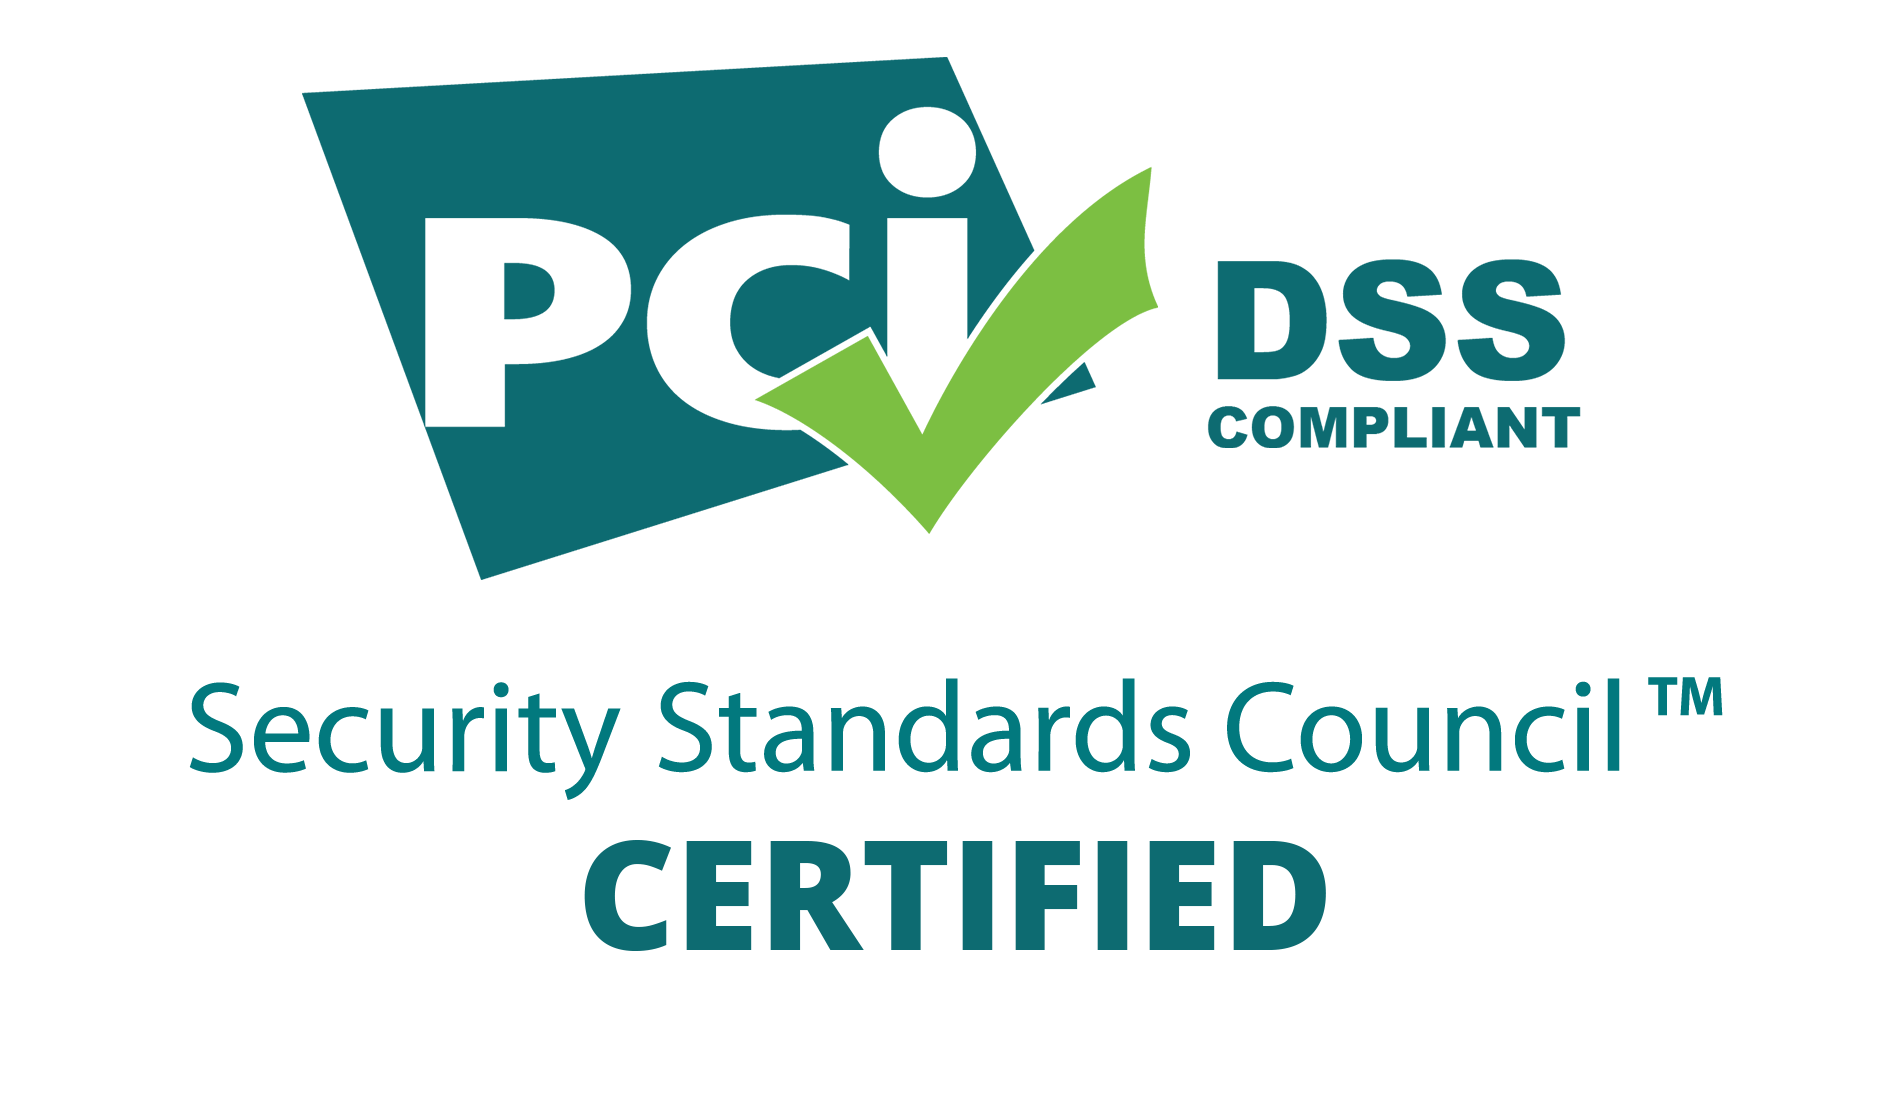 PCI DSS compliant security standard council certified